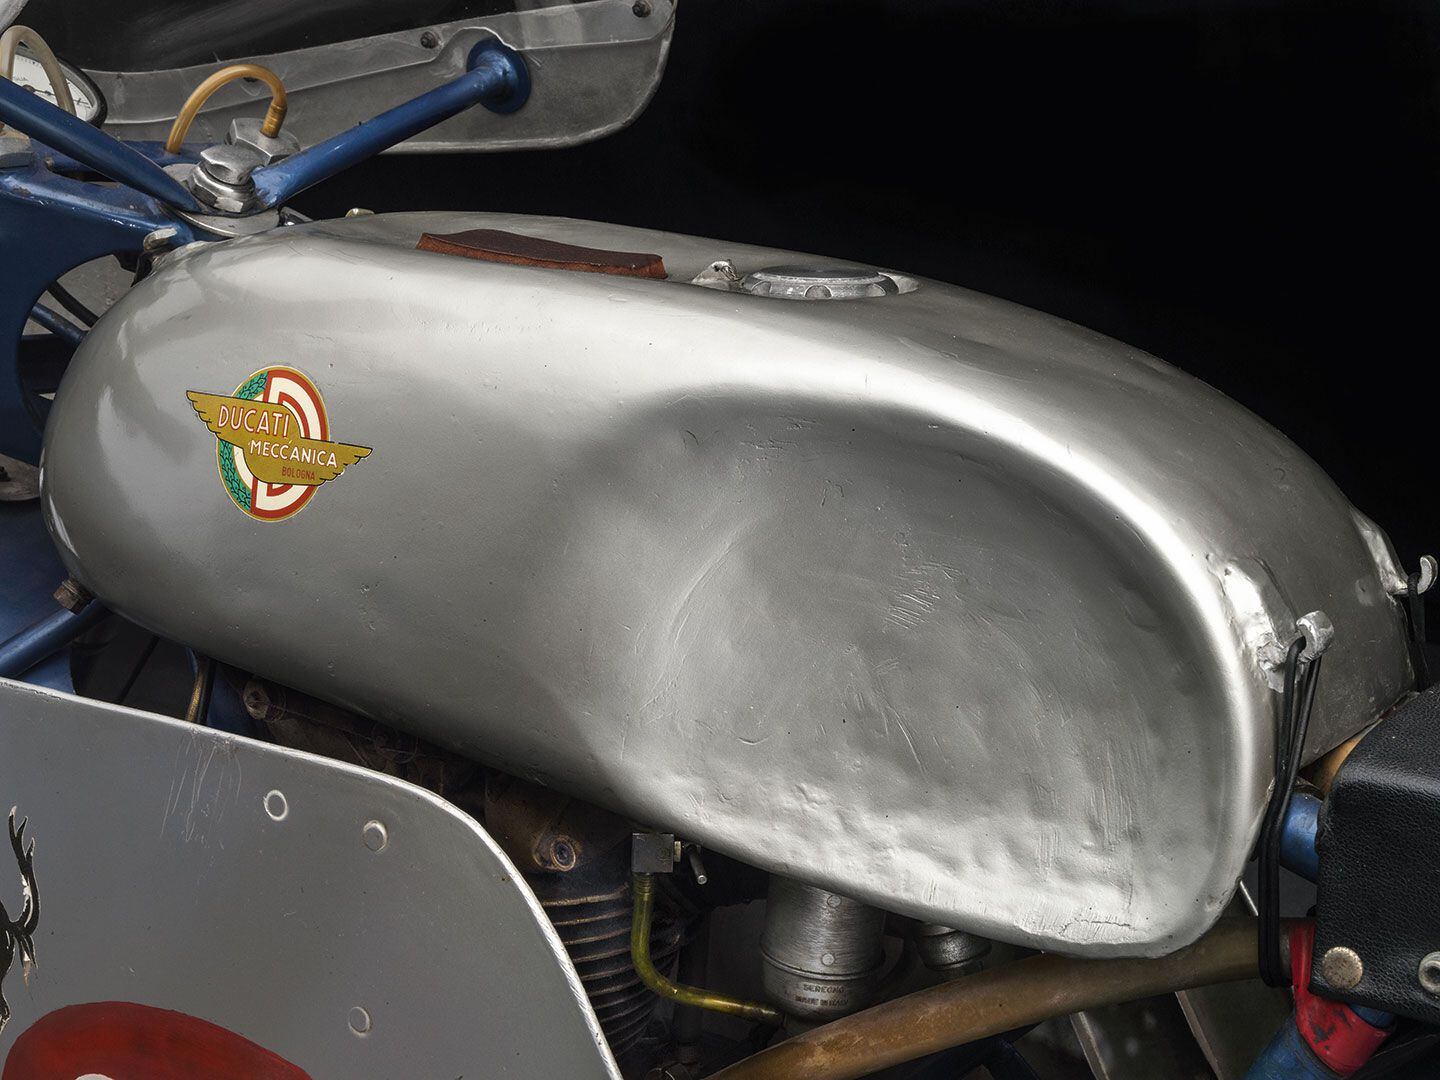 The hand-beaten aluminum tank on a 1959 Ducati 125 Desmo Barcone Grand Prix Racer held in place with rubber bands.